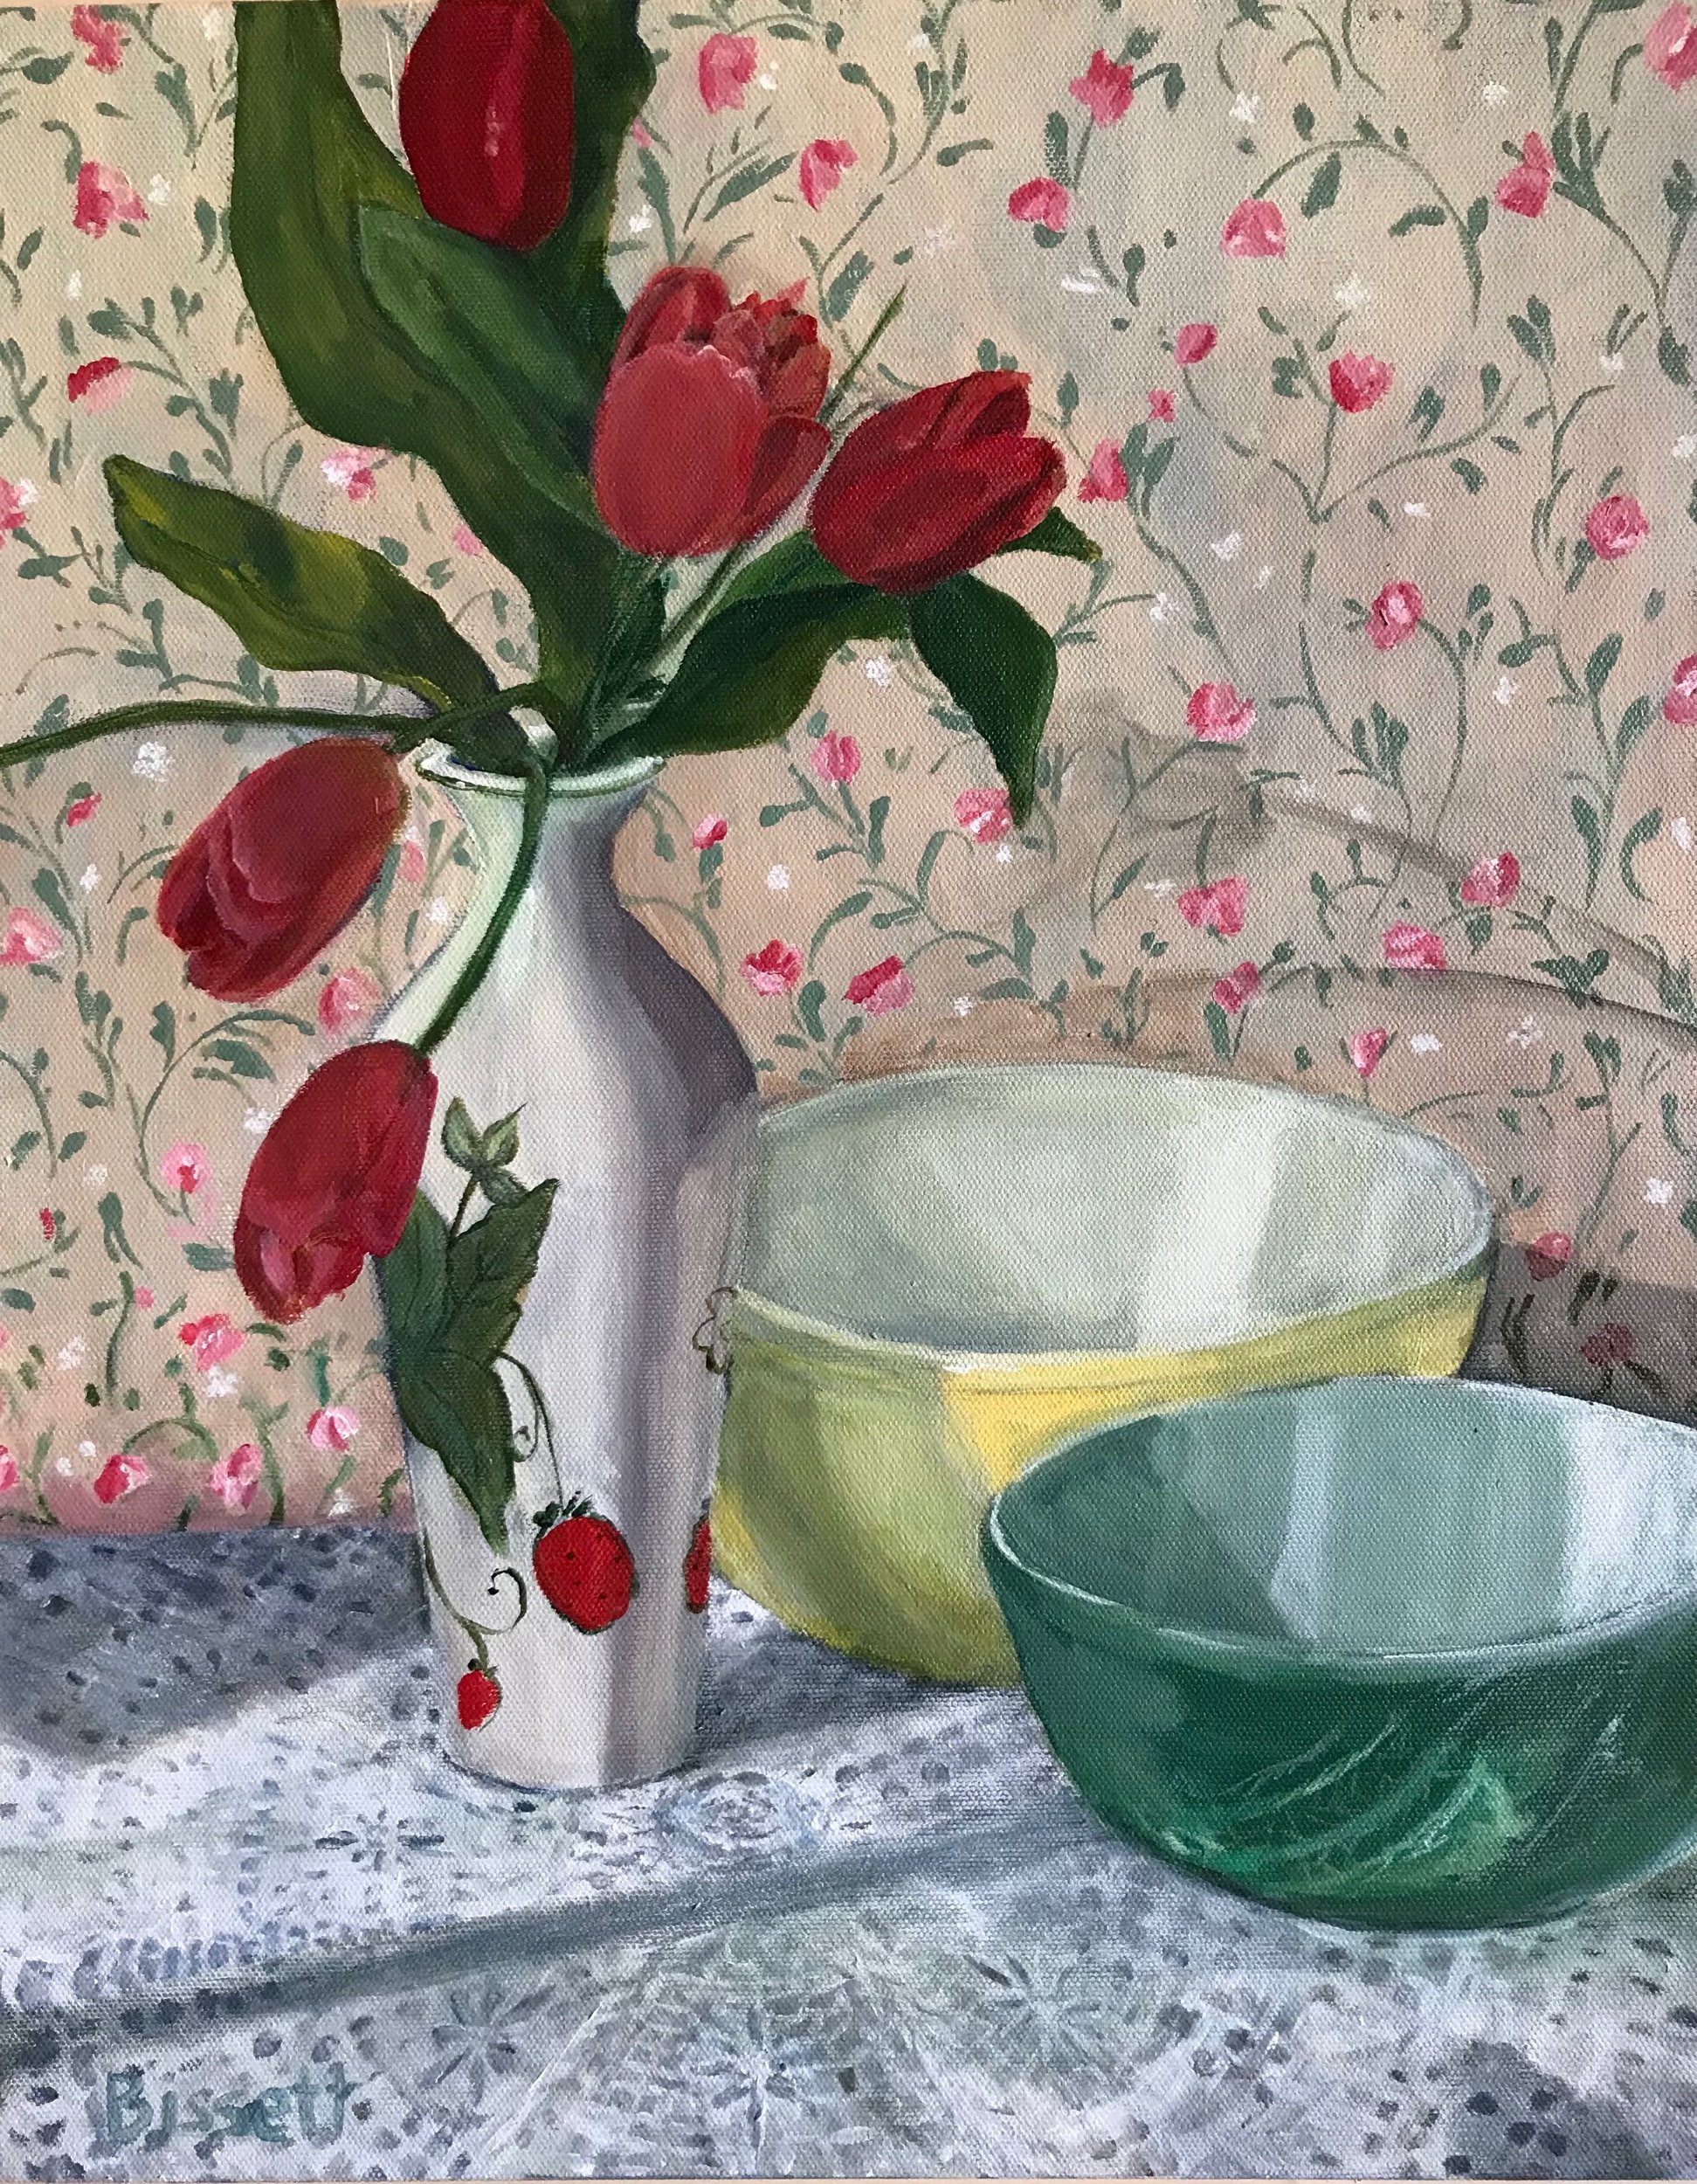 Still Life with Mixing Bowls 